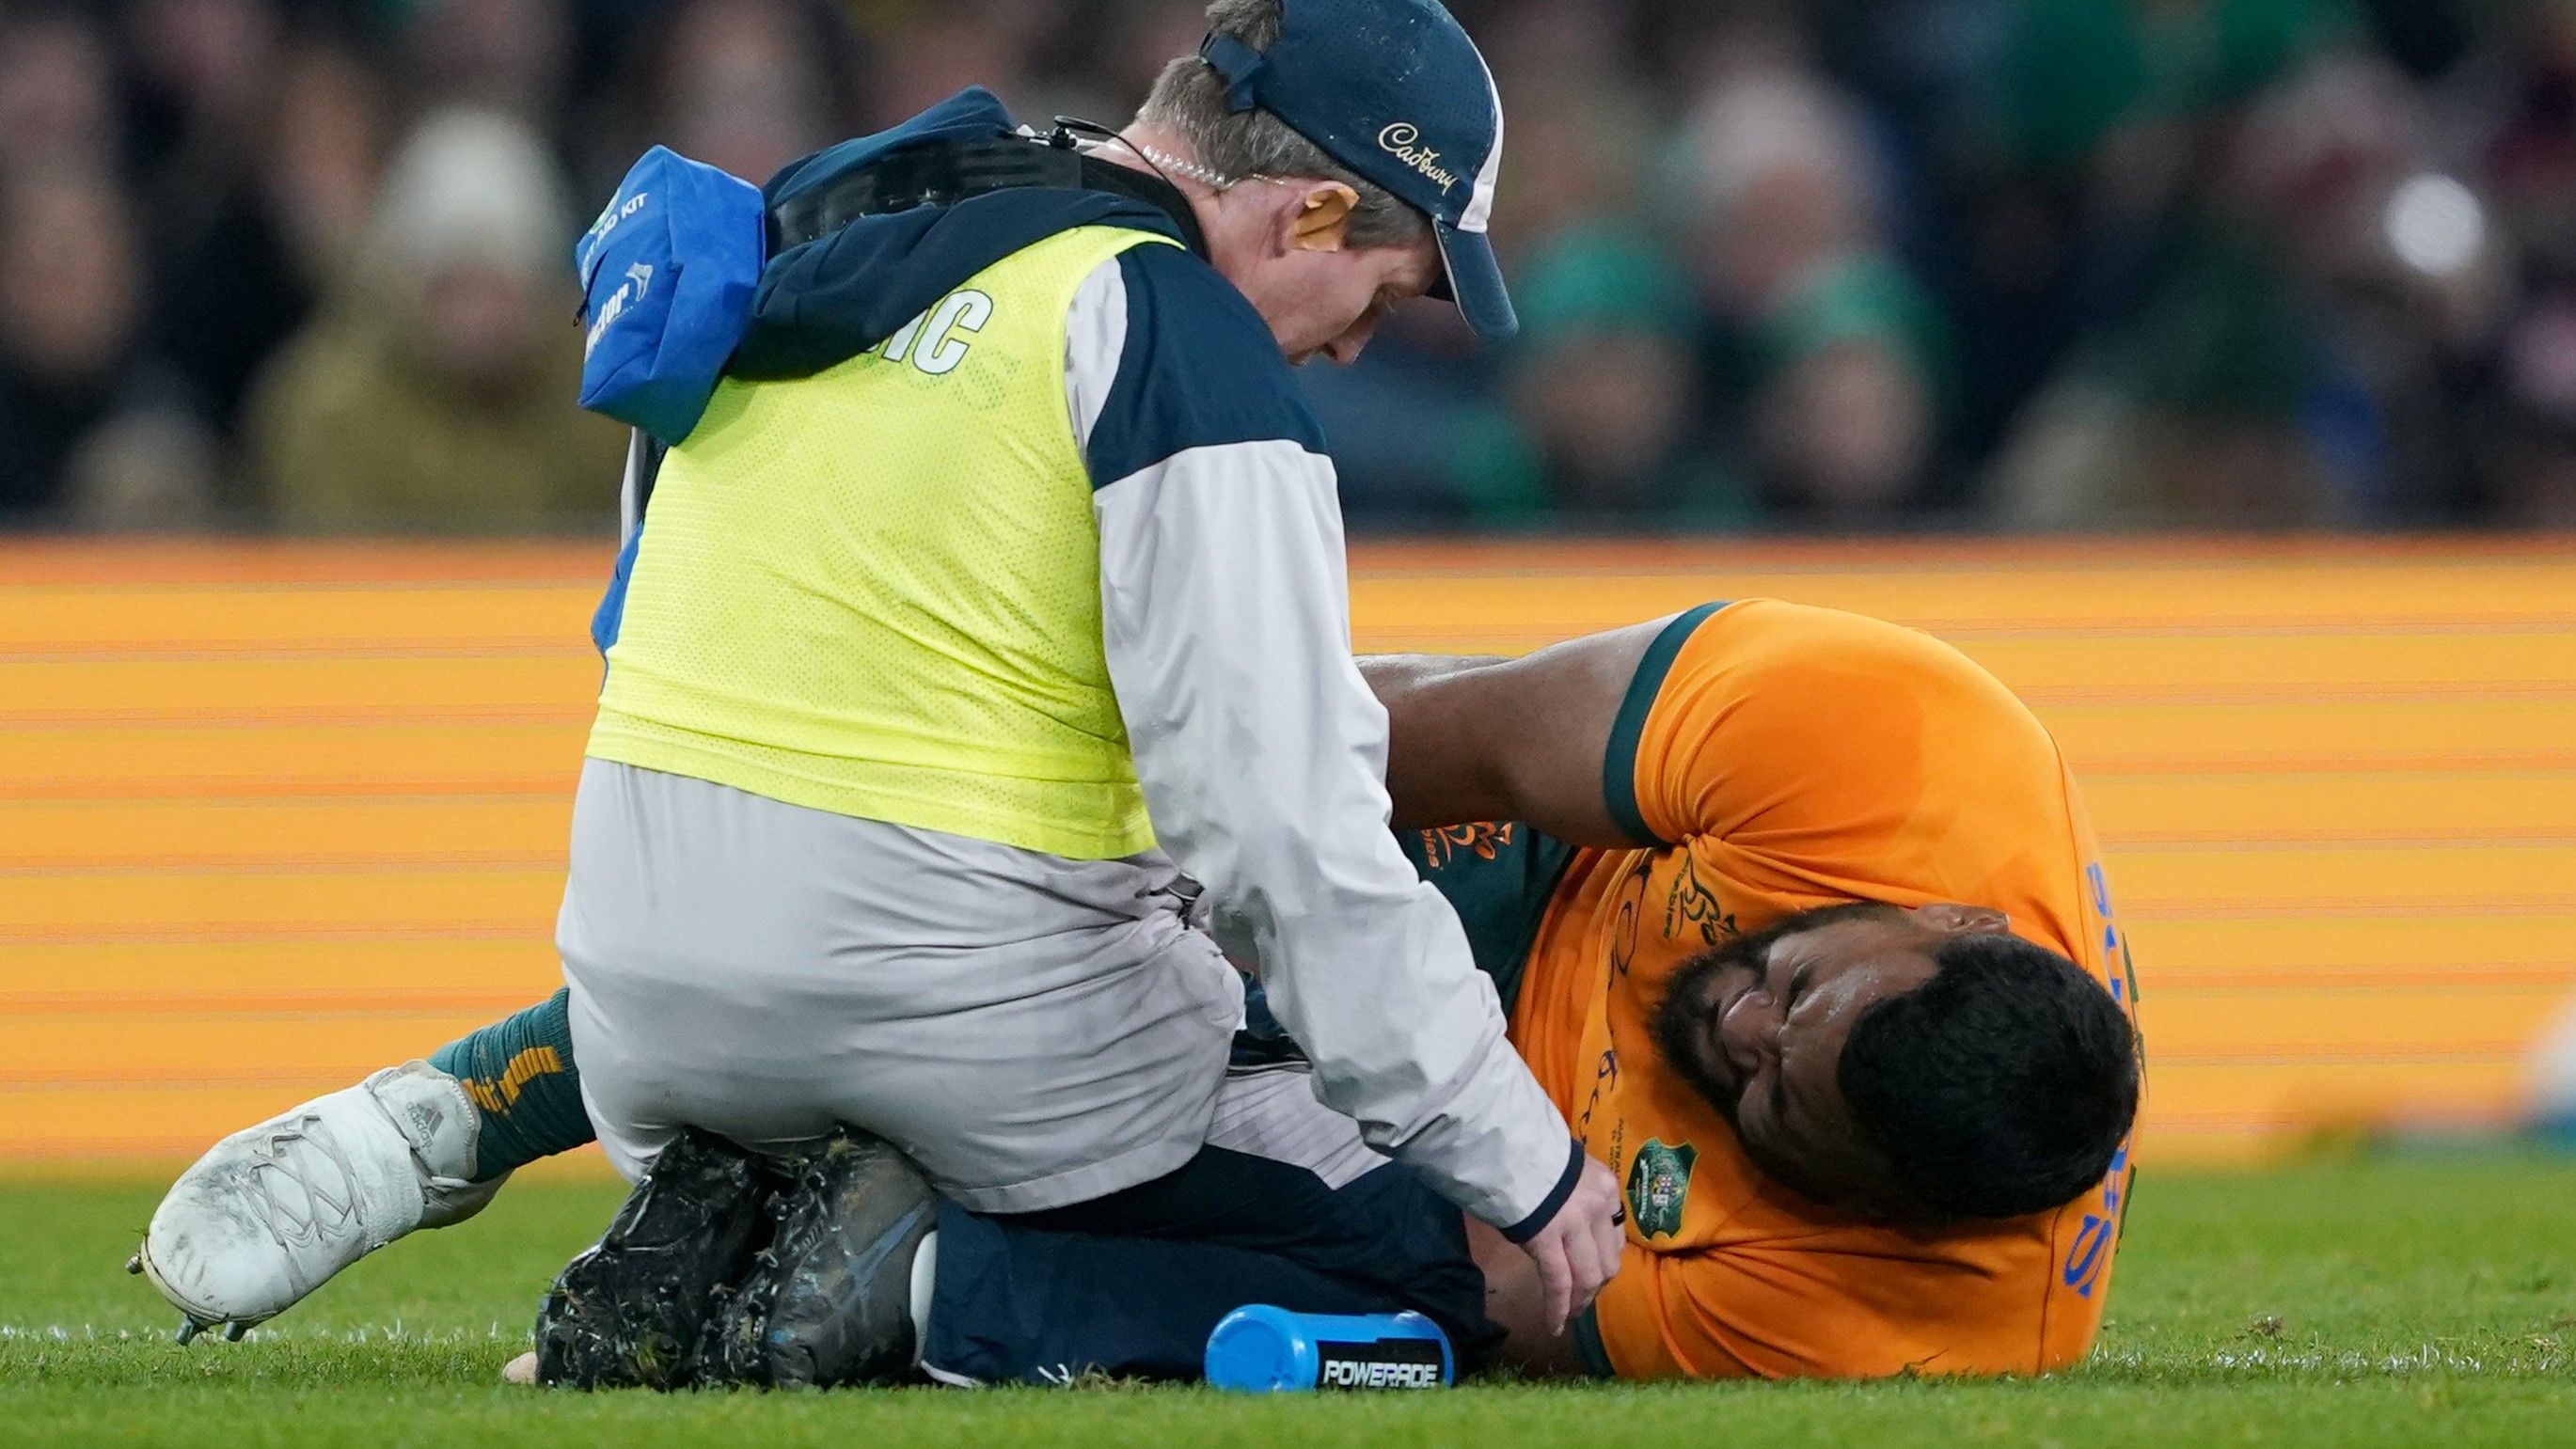 Taniela Tupou could be out for up to a year after suffering a suspected ruptured Achilles tendon.